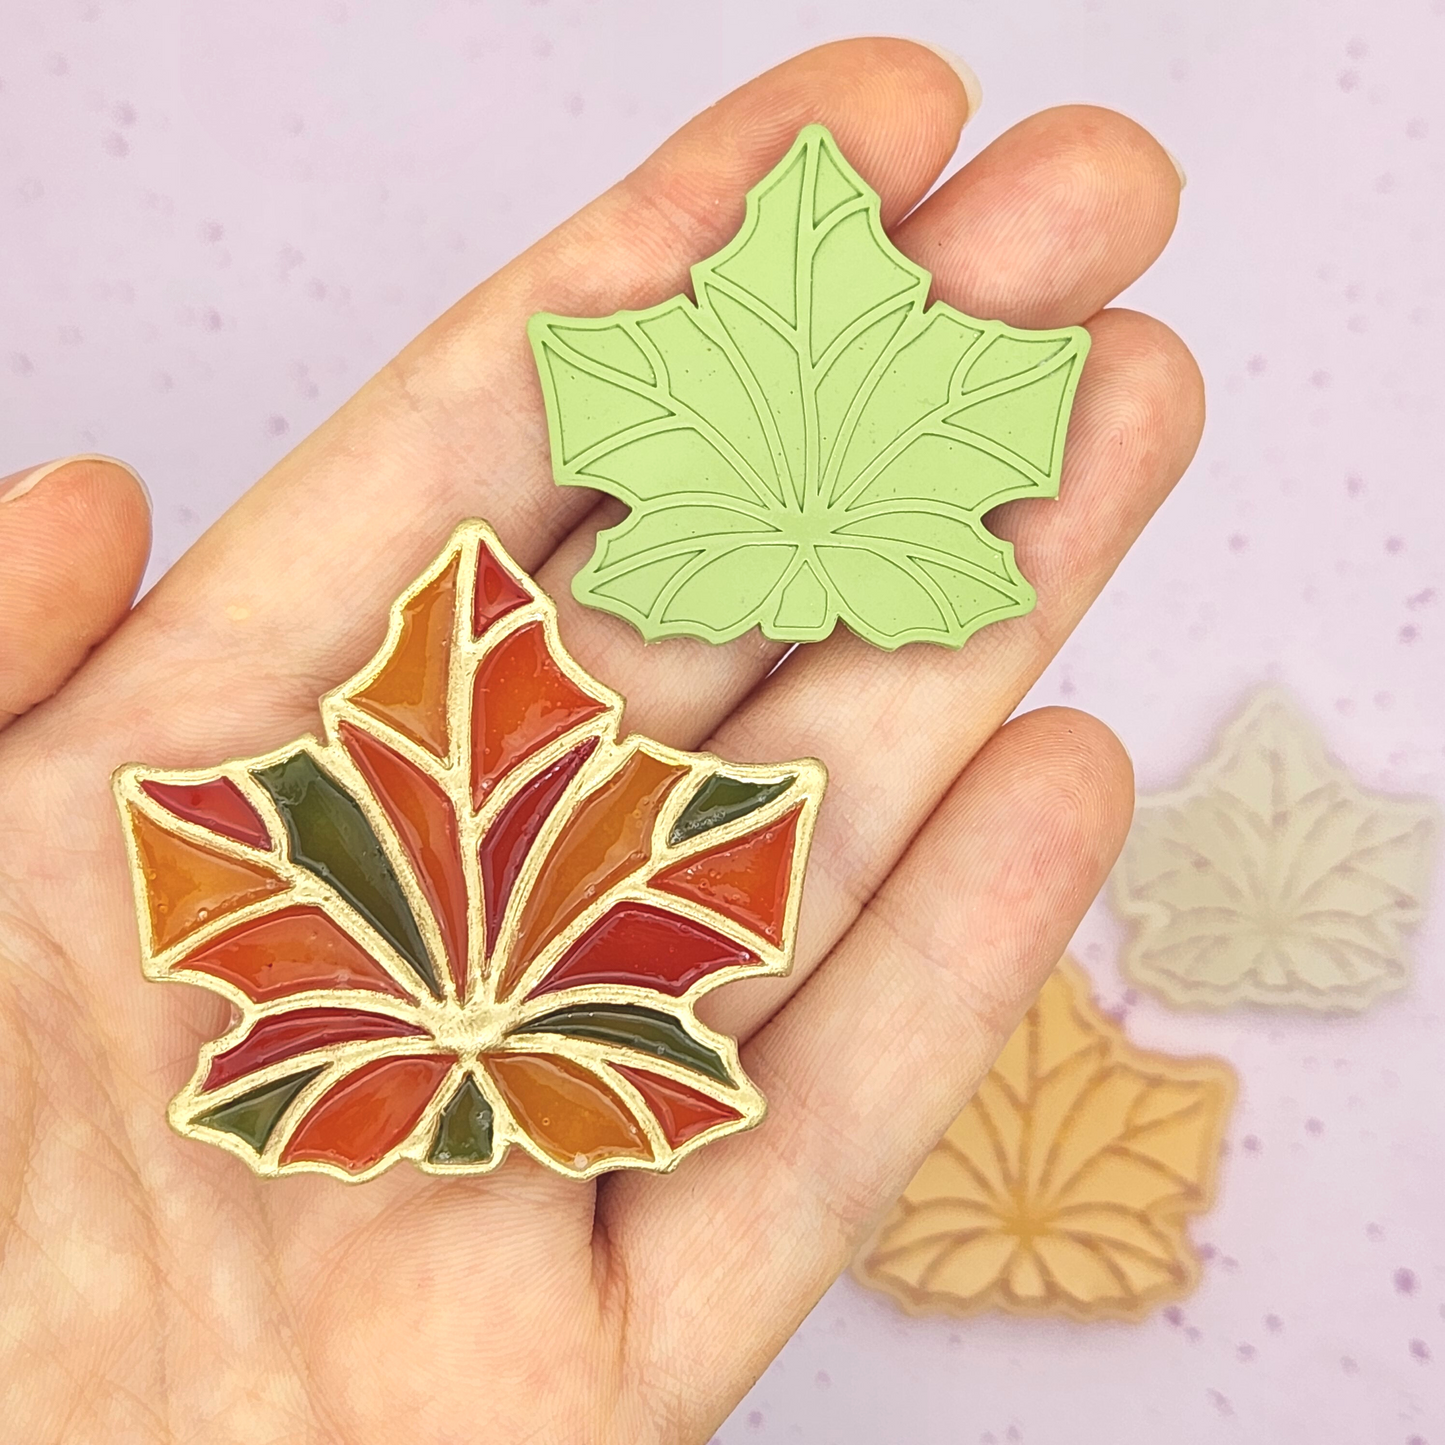 Stained Glass Maple Leaf